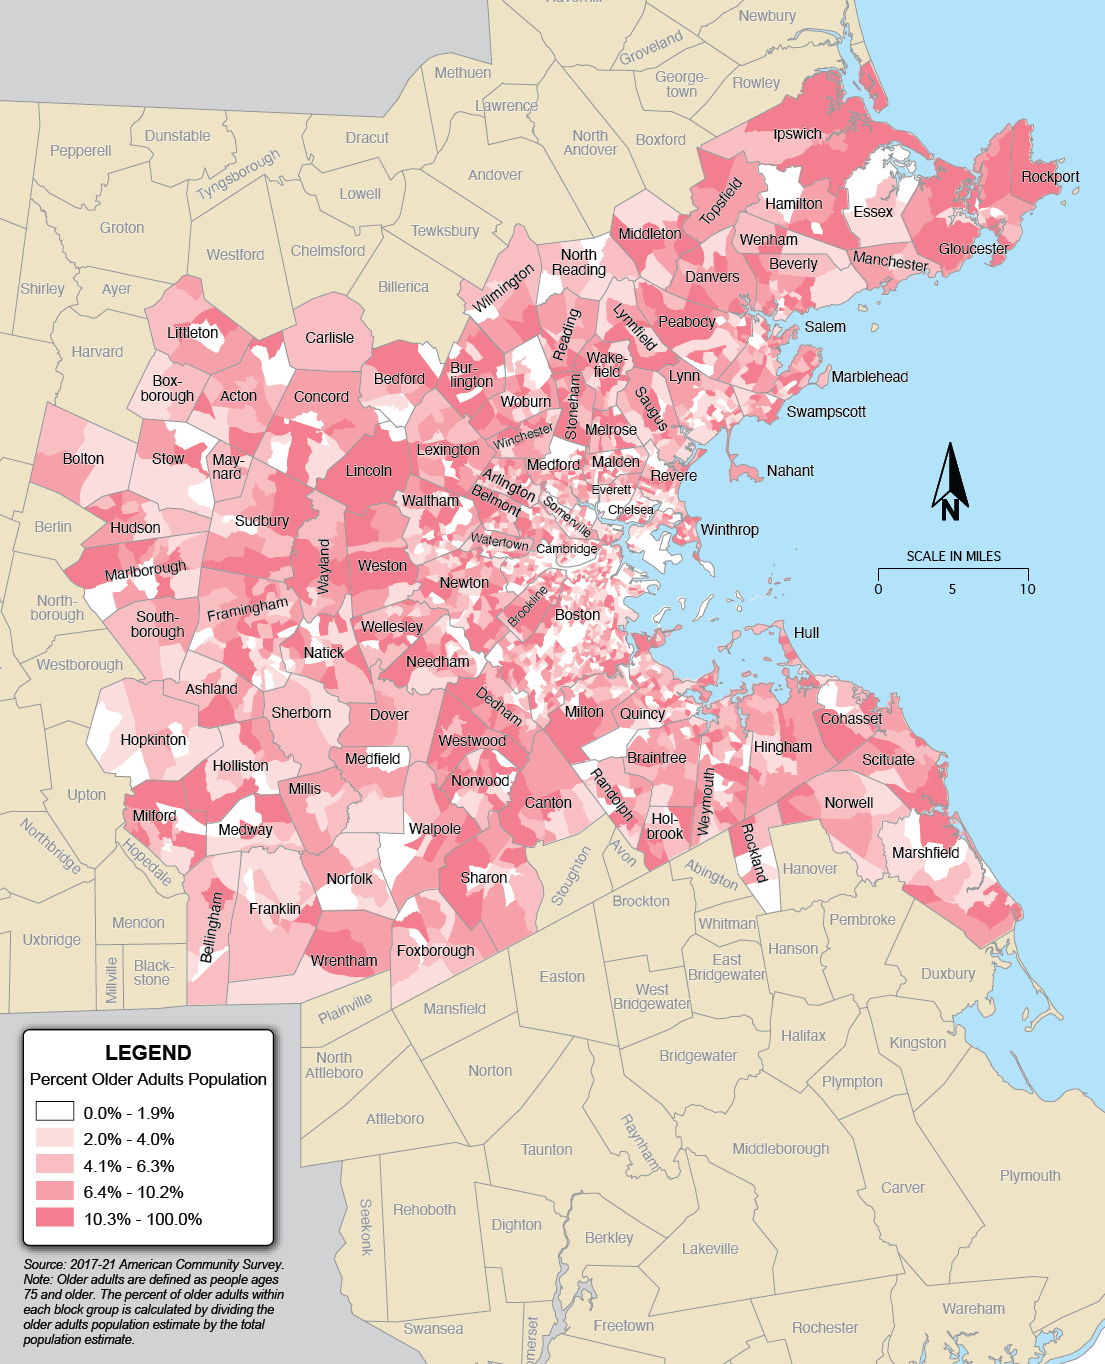 A map showing the percentage of older adults in the Boston Region.